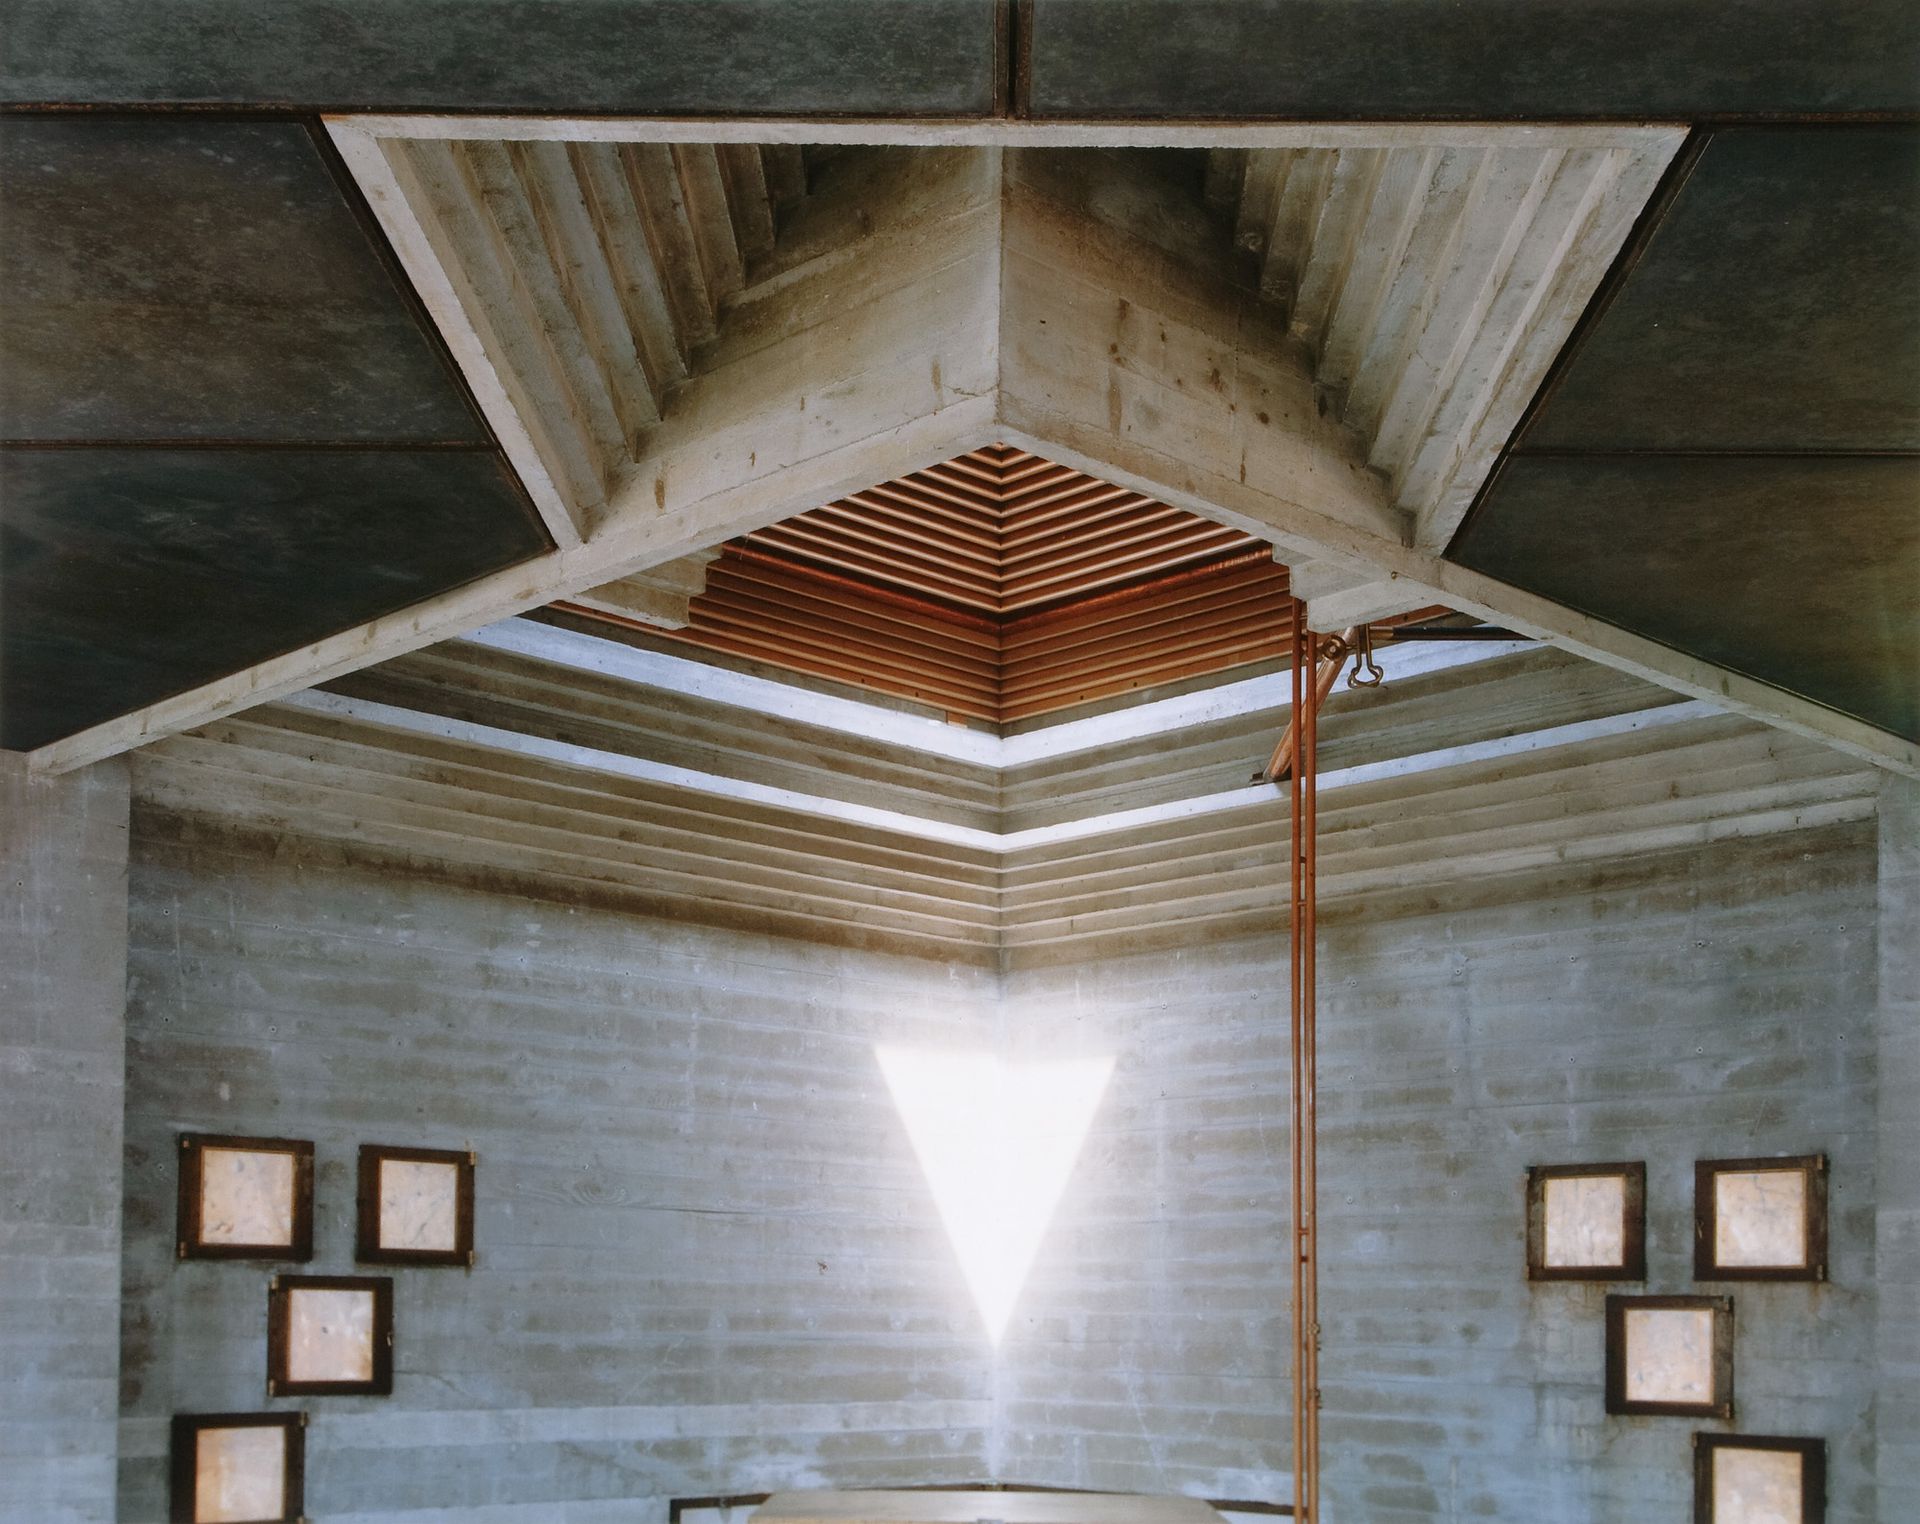 Carlo Scarpa's Tomba Brion: Photographs by Guido Guidi, 1997-20071920 x 1524